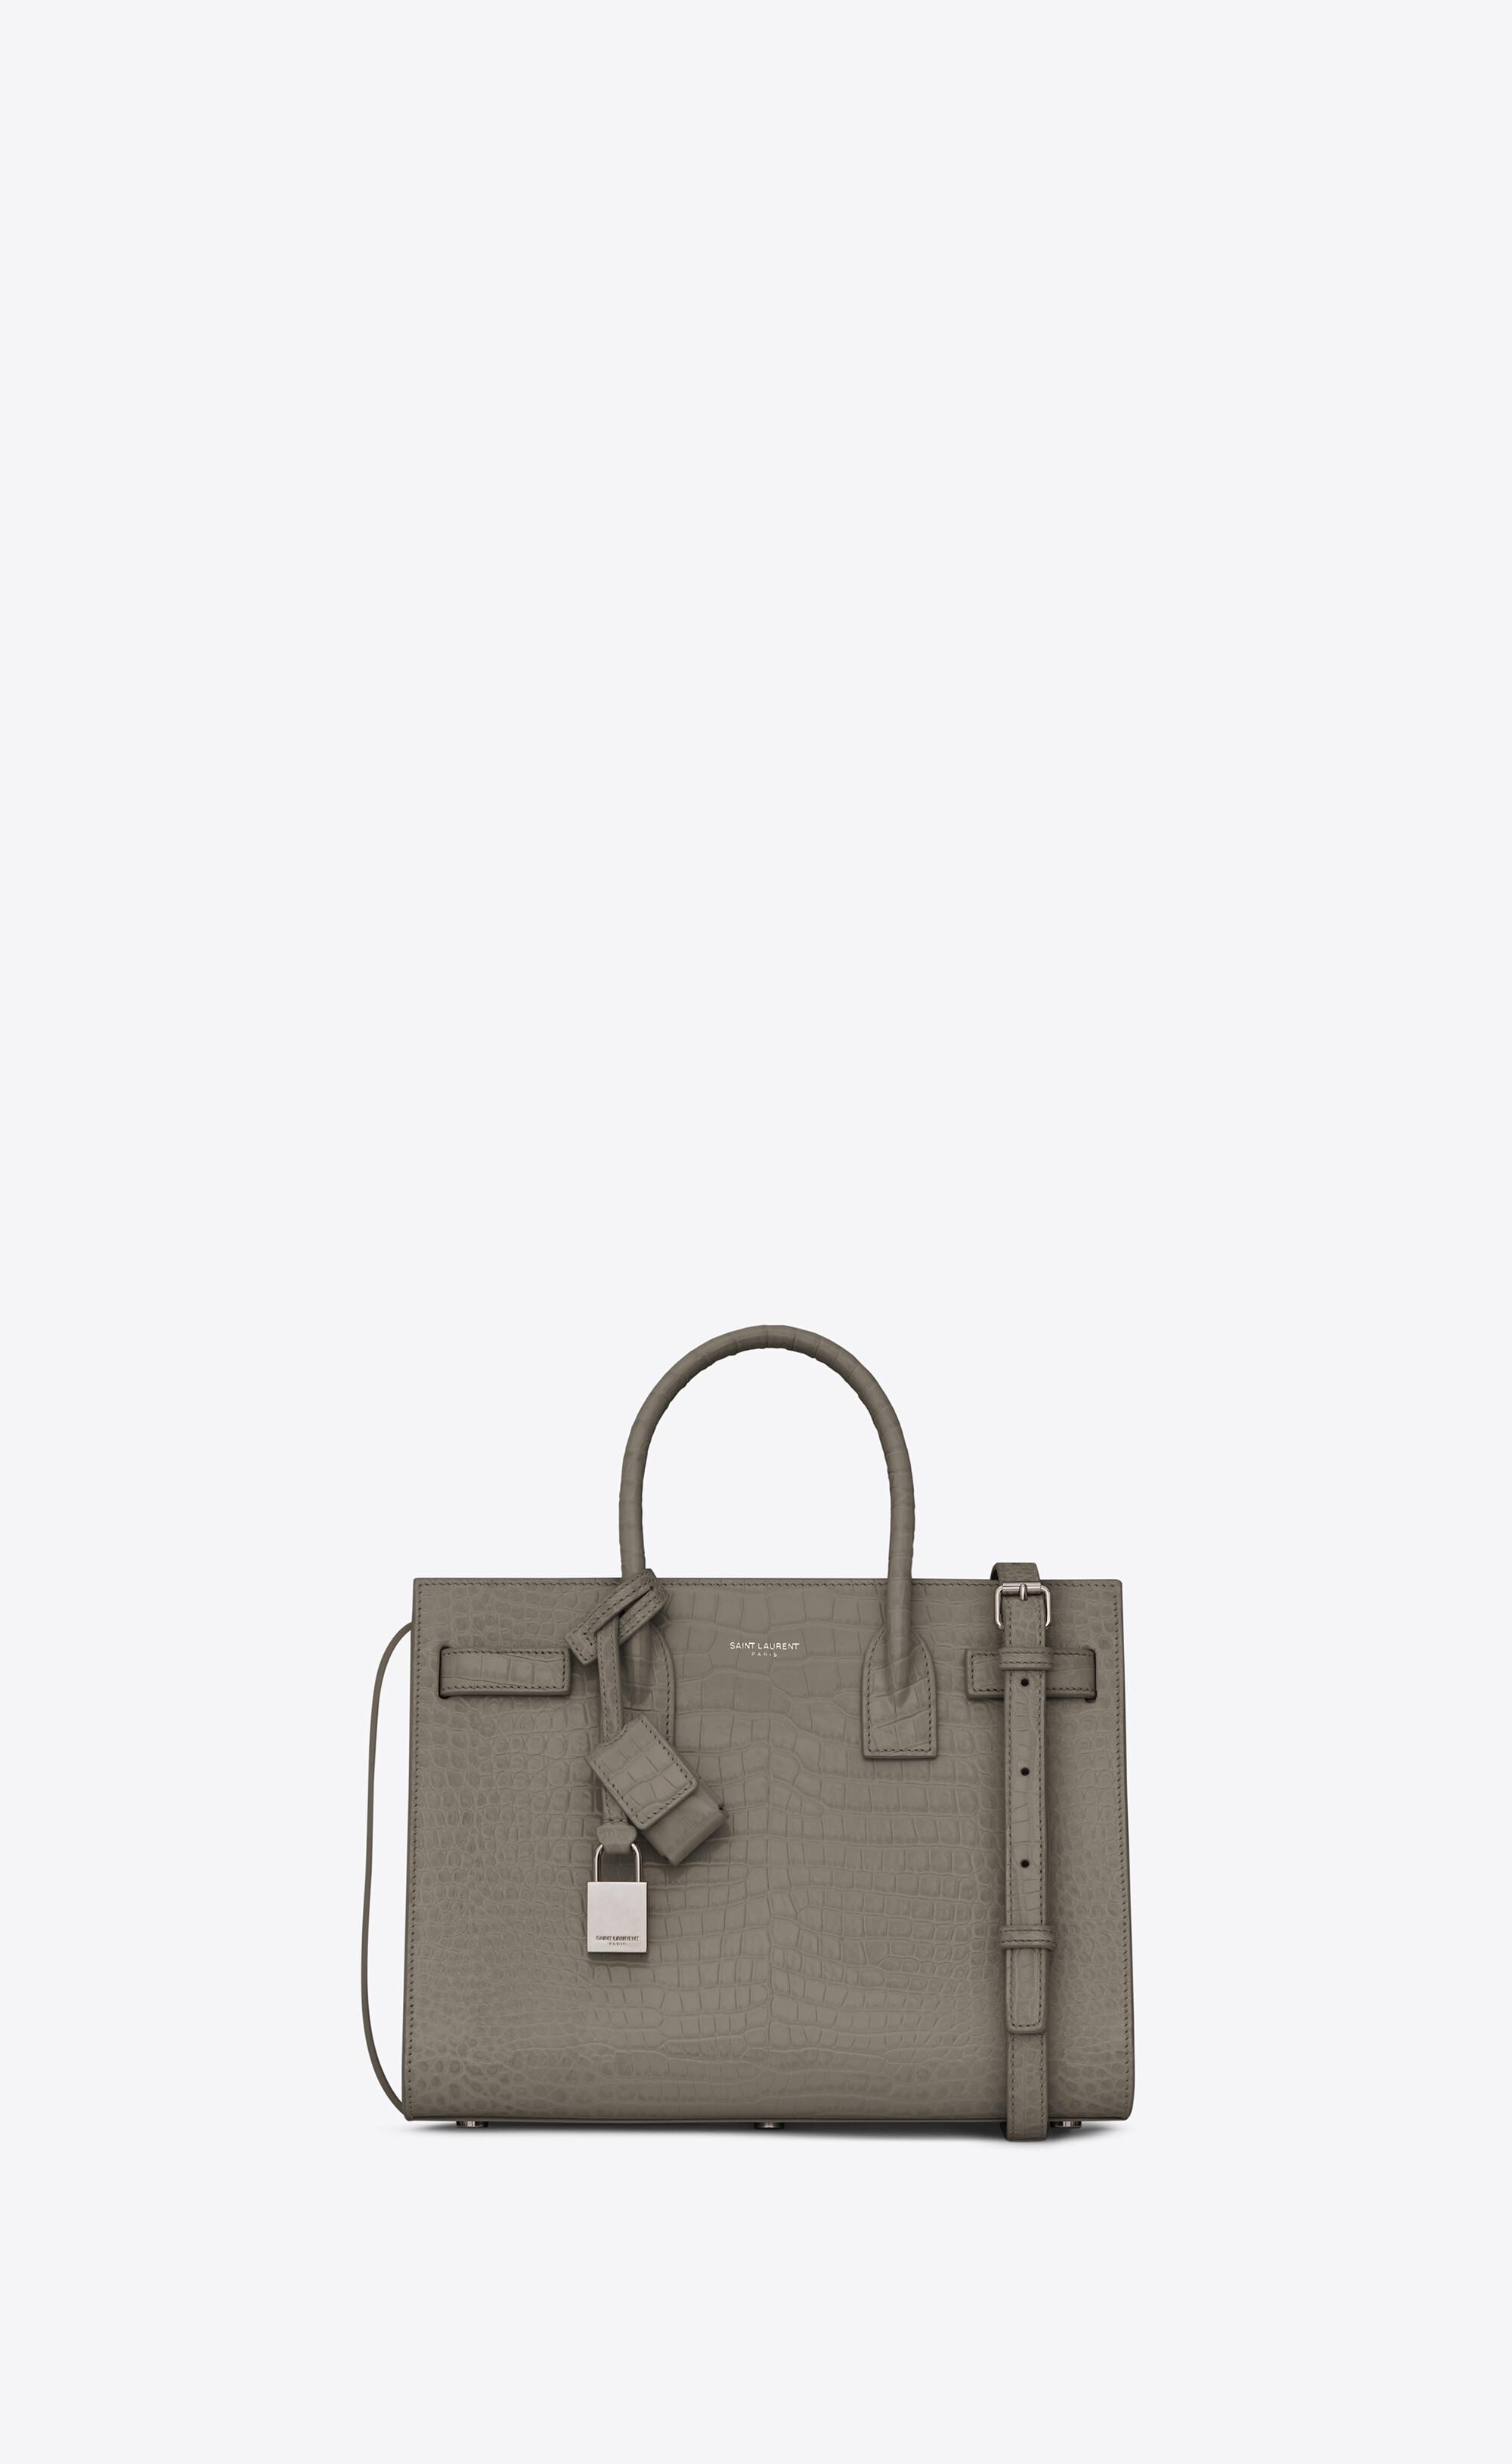 Saint Laurent Sac De Jour Baby In Crocodile-embossed Shiny Leather in Gray  | Lyst